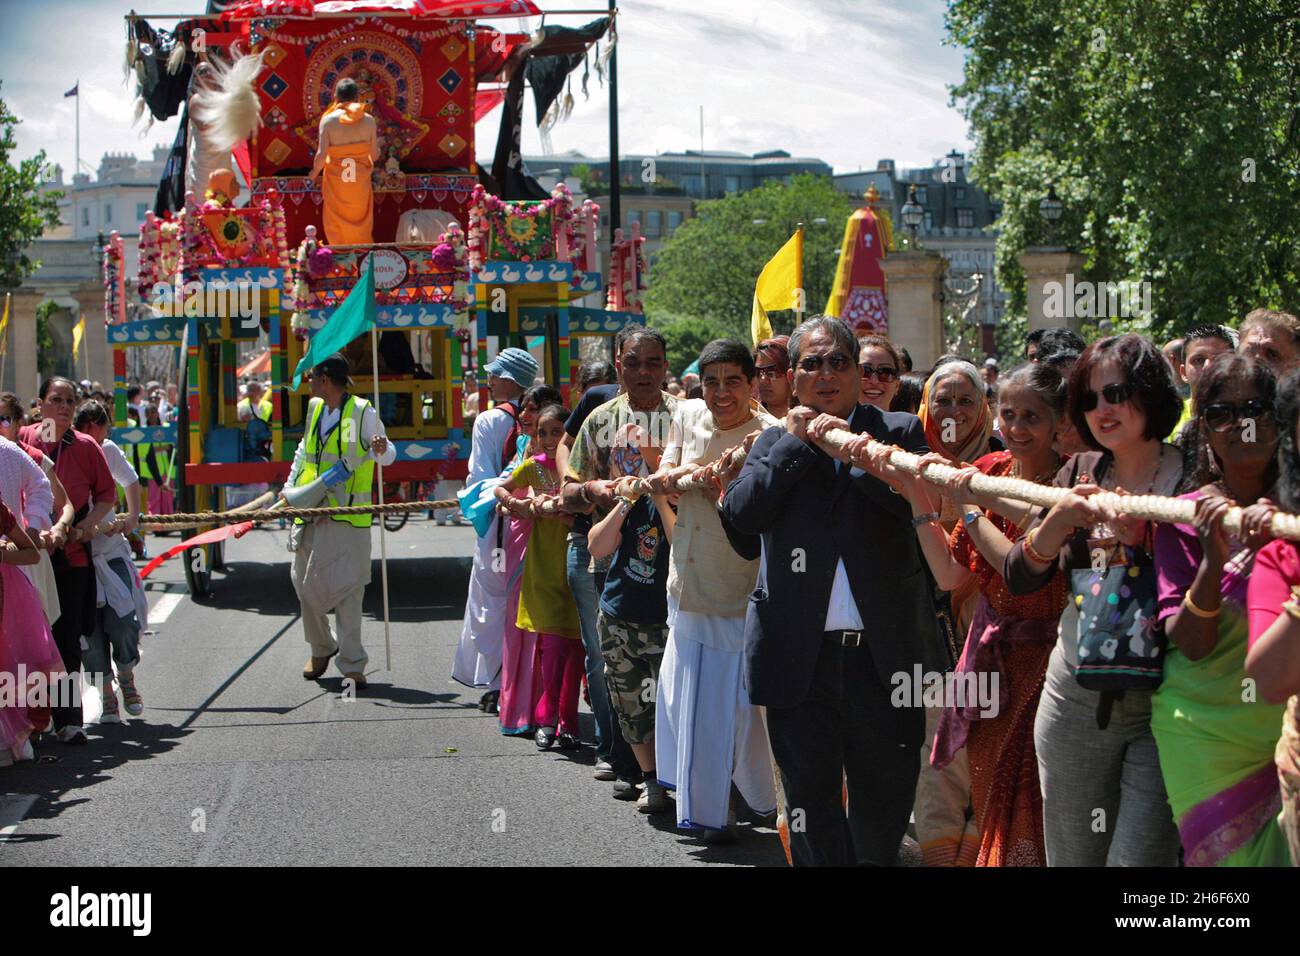 Scenes from the 40th London Festival of Chariots. The festival, otherwise known as Ratha Yatra, celebrating Hare Krishna, which took place in central London. The 5000-year-old festival was brought from India in 1967 by the founder of the Hare Krishna movement and is celebrated every summer in over 200 cities around the world - this year in London for the 40th time. Stock Photo